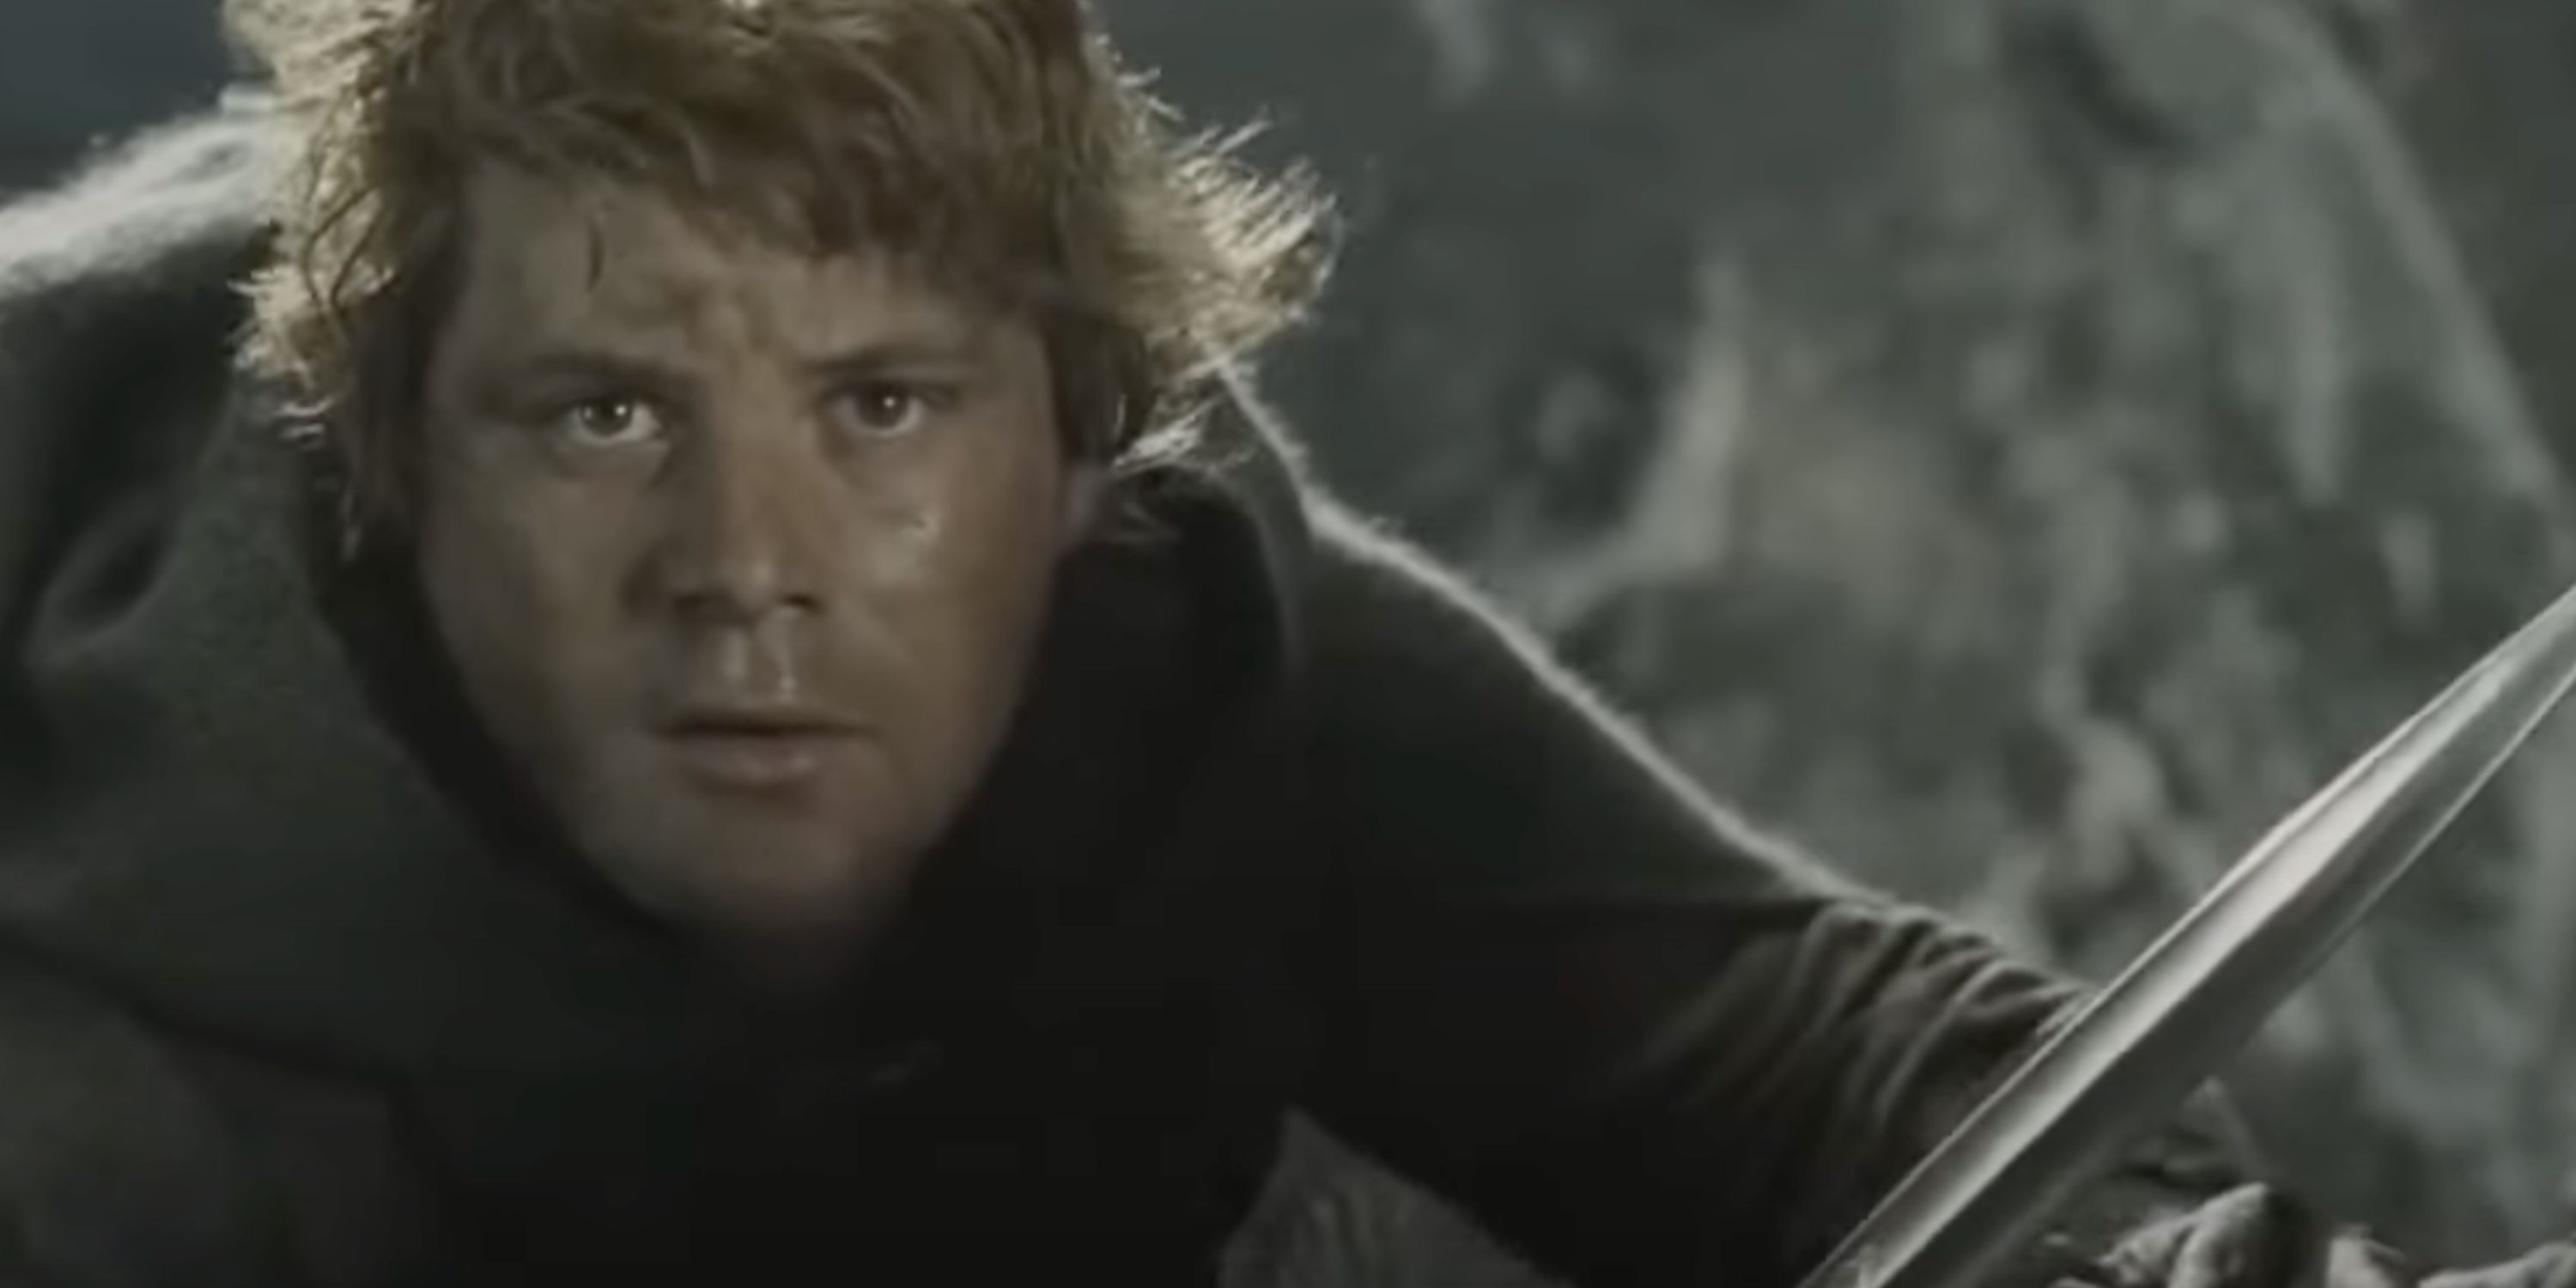 sam looking straight ahead in the lord of the rings the return of the king